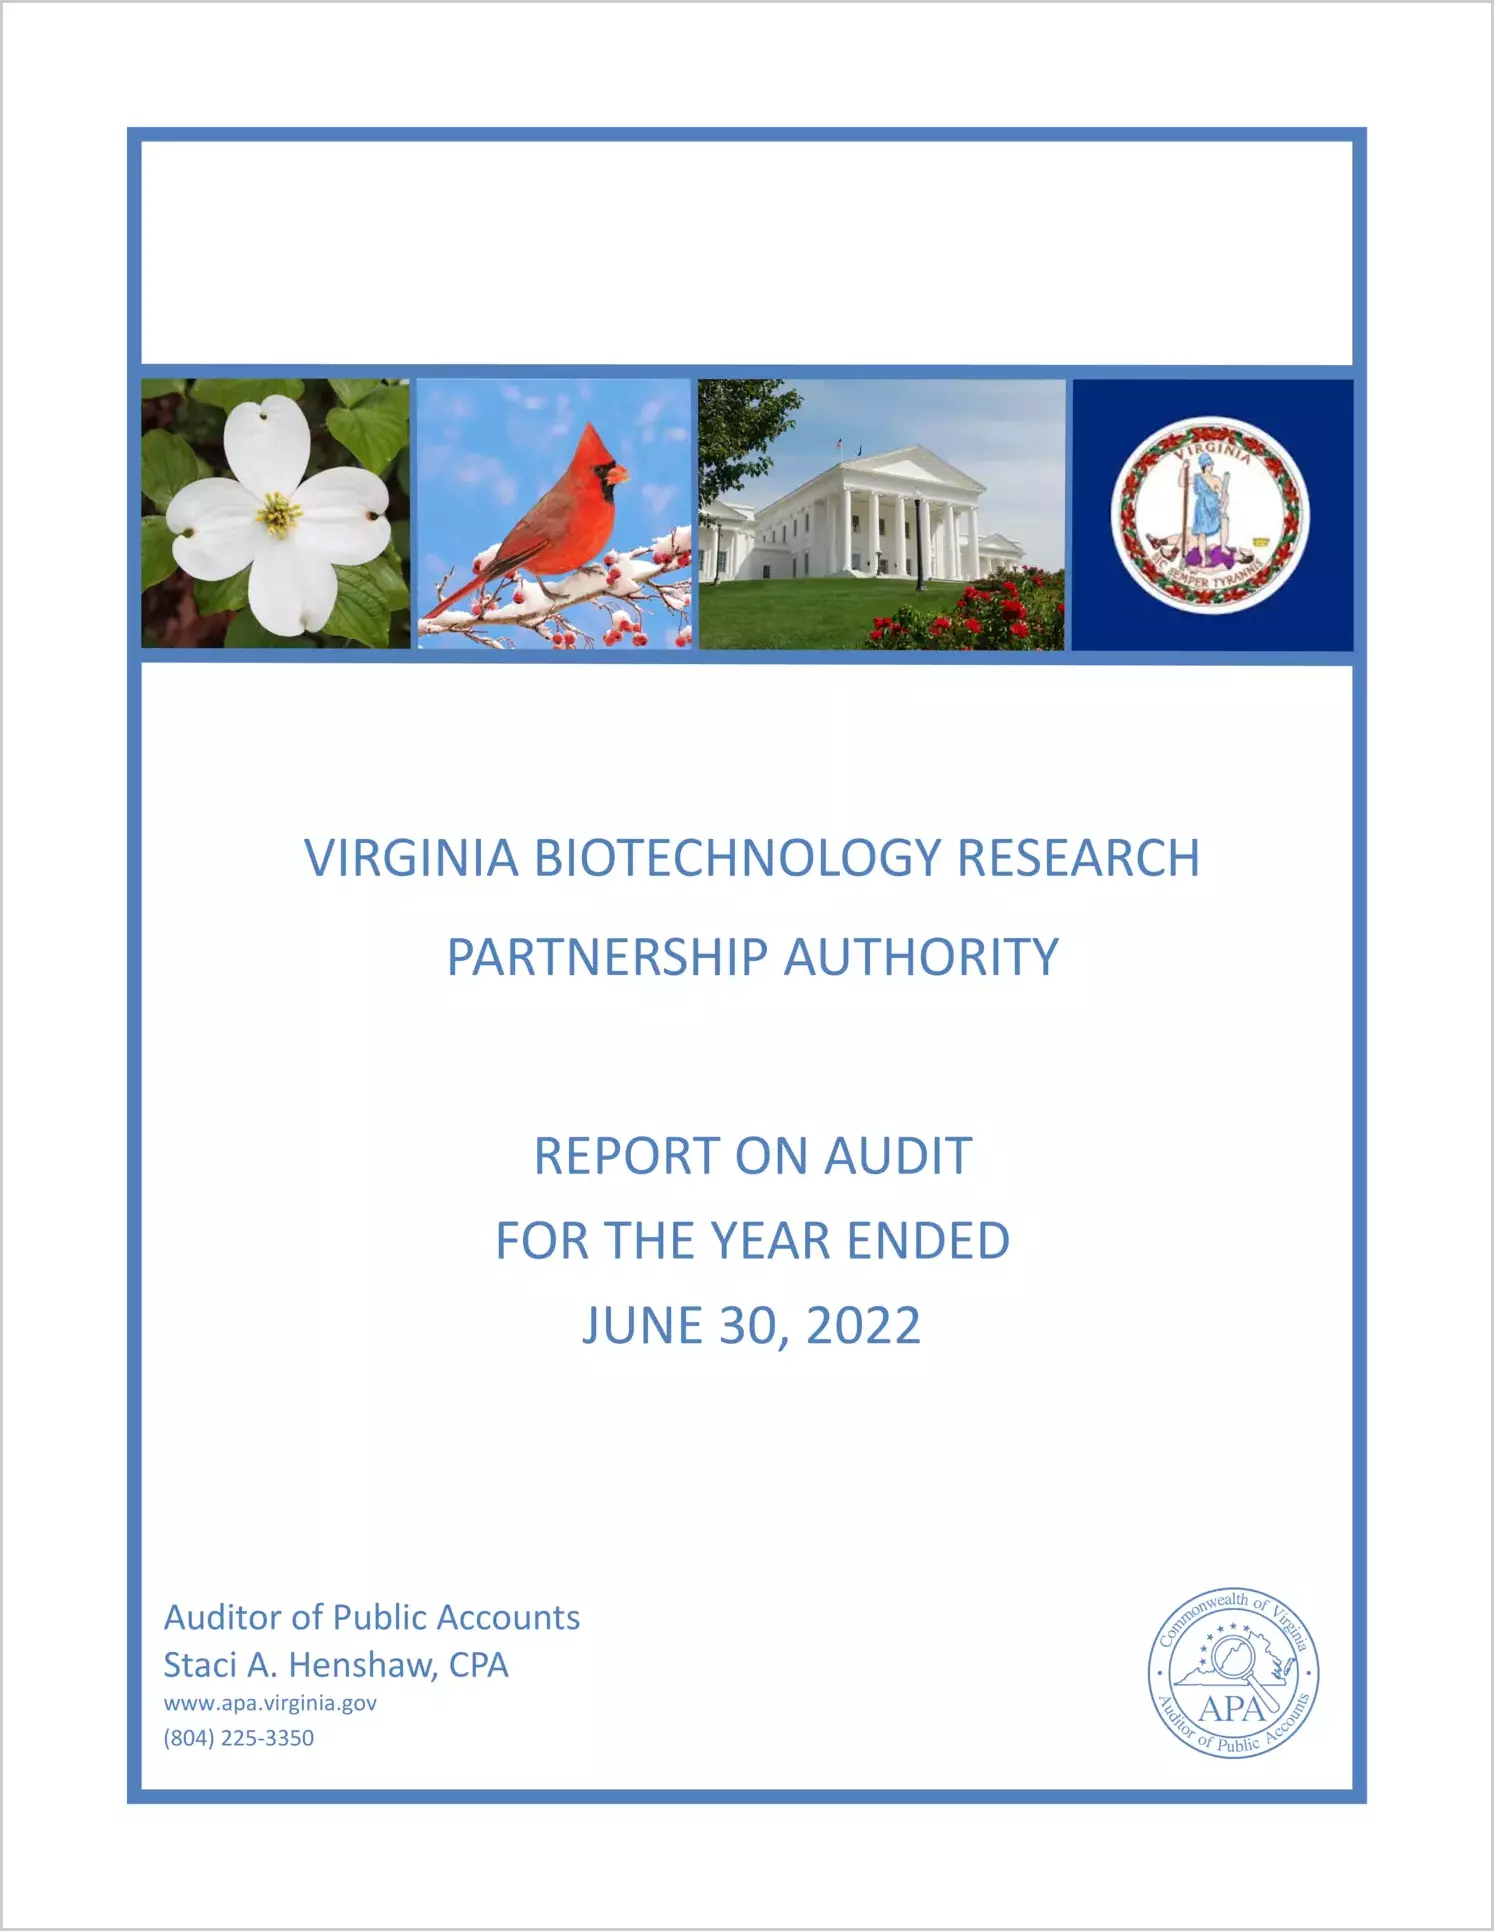 Virginia Biotechnology Research Partnership Authority for the year ended June 30, 2022